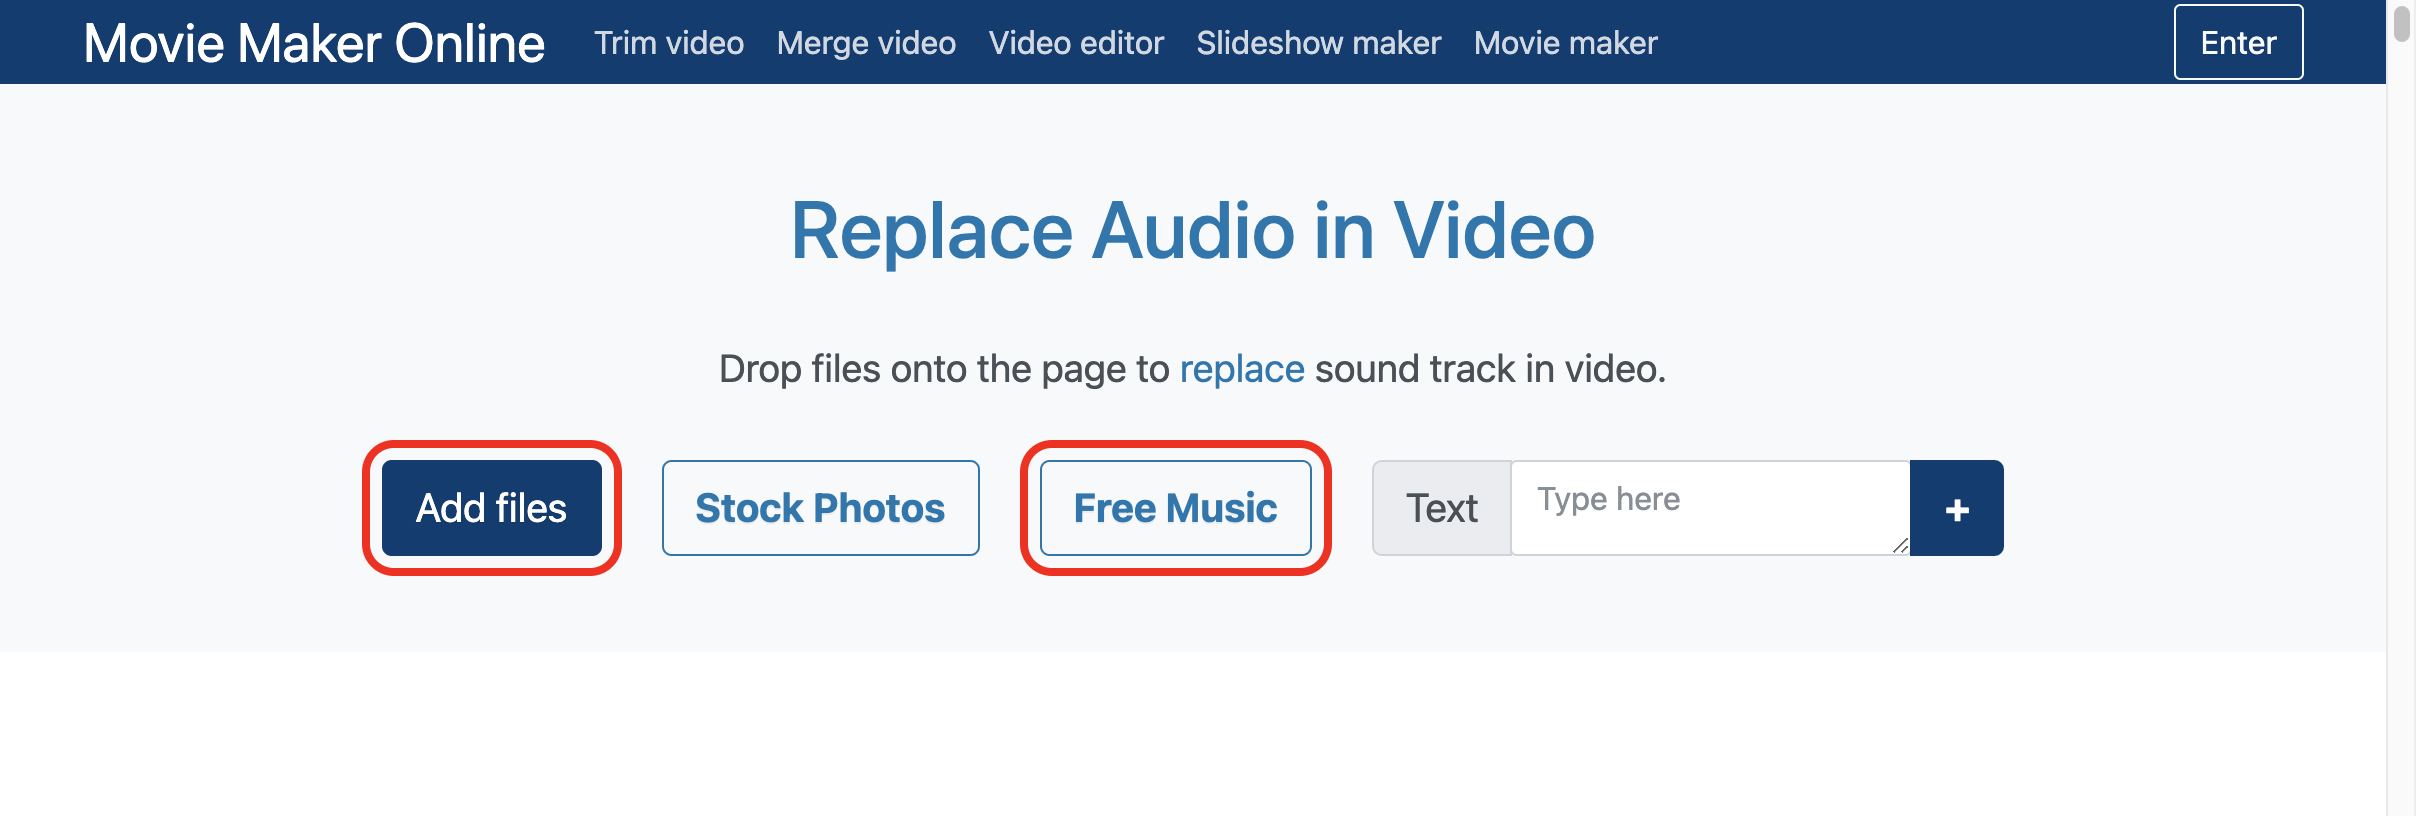 Add audio and video files